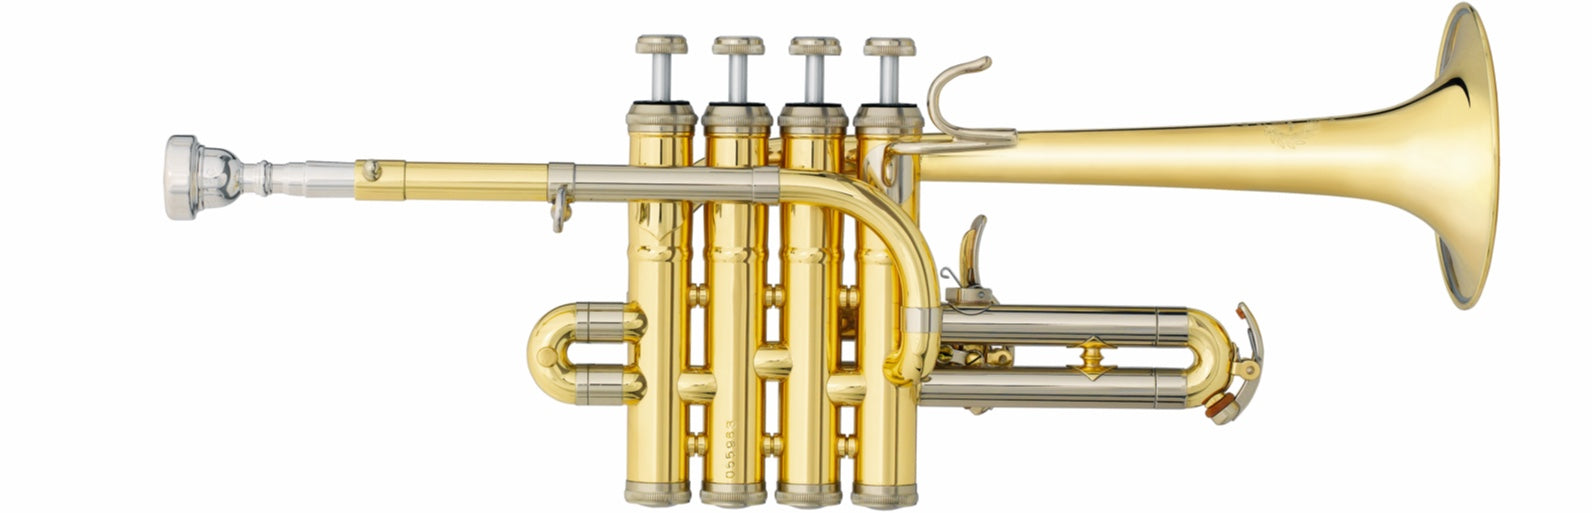 BS3131IIL Challenger II Piccolo Trumpet - Lacquer